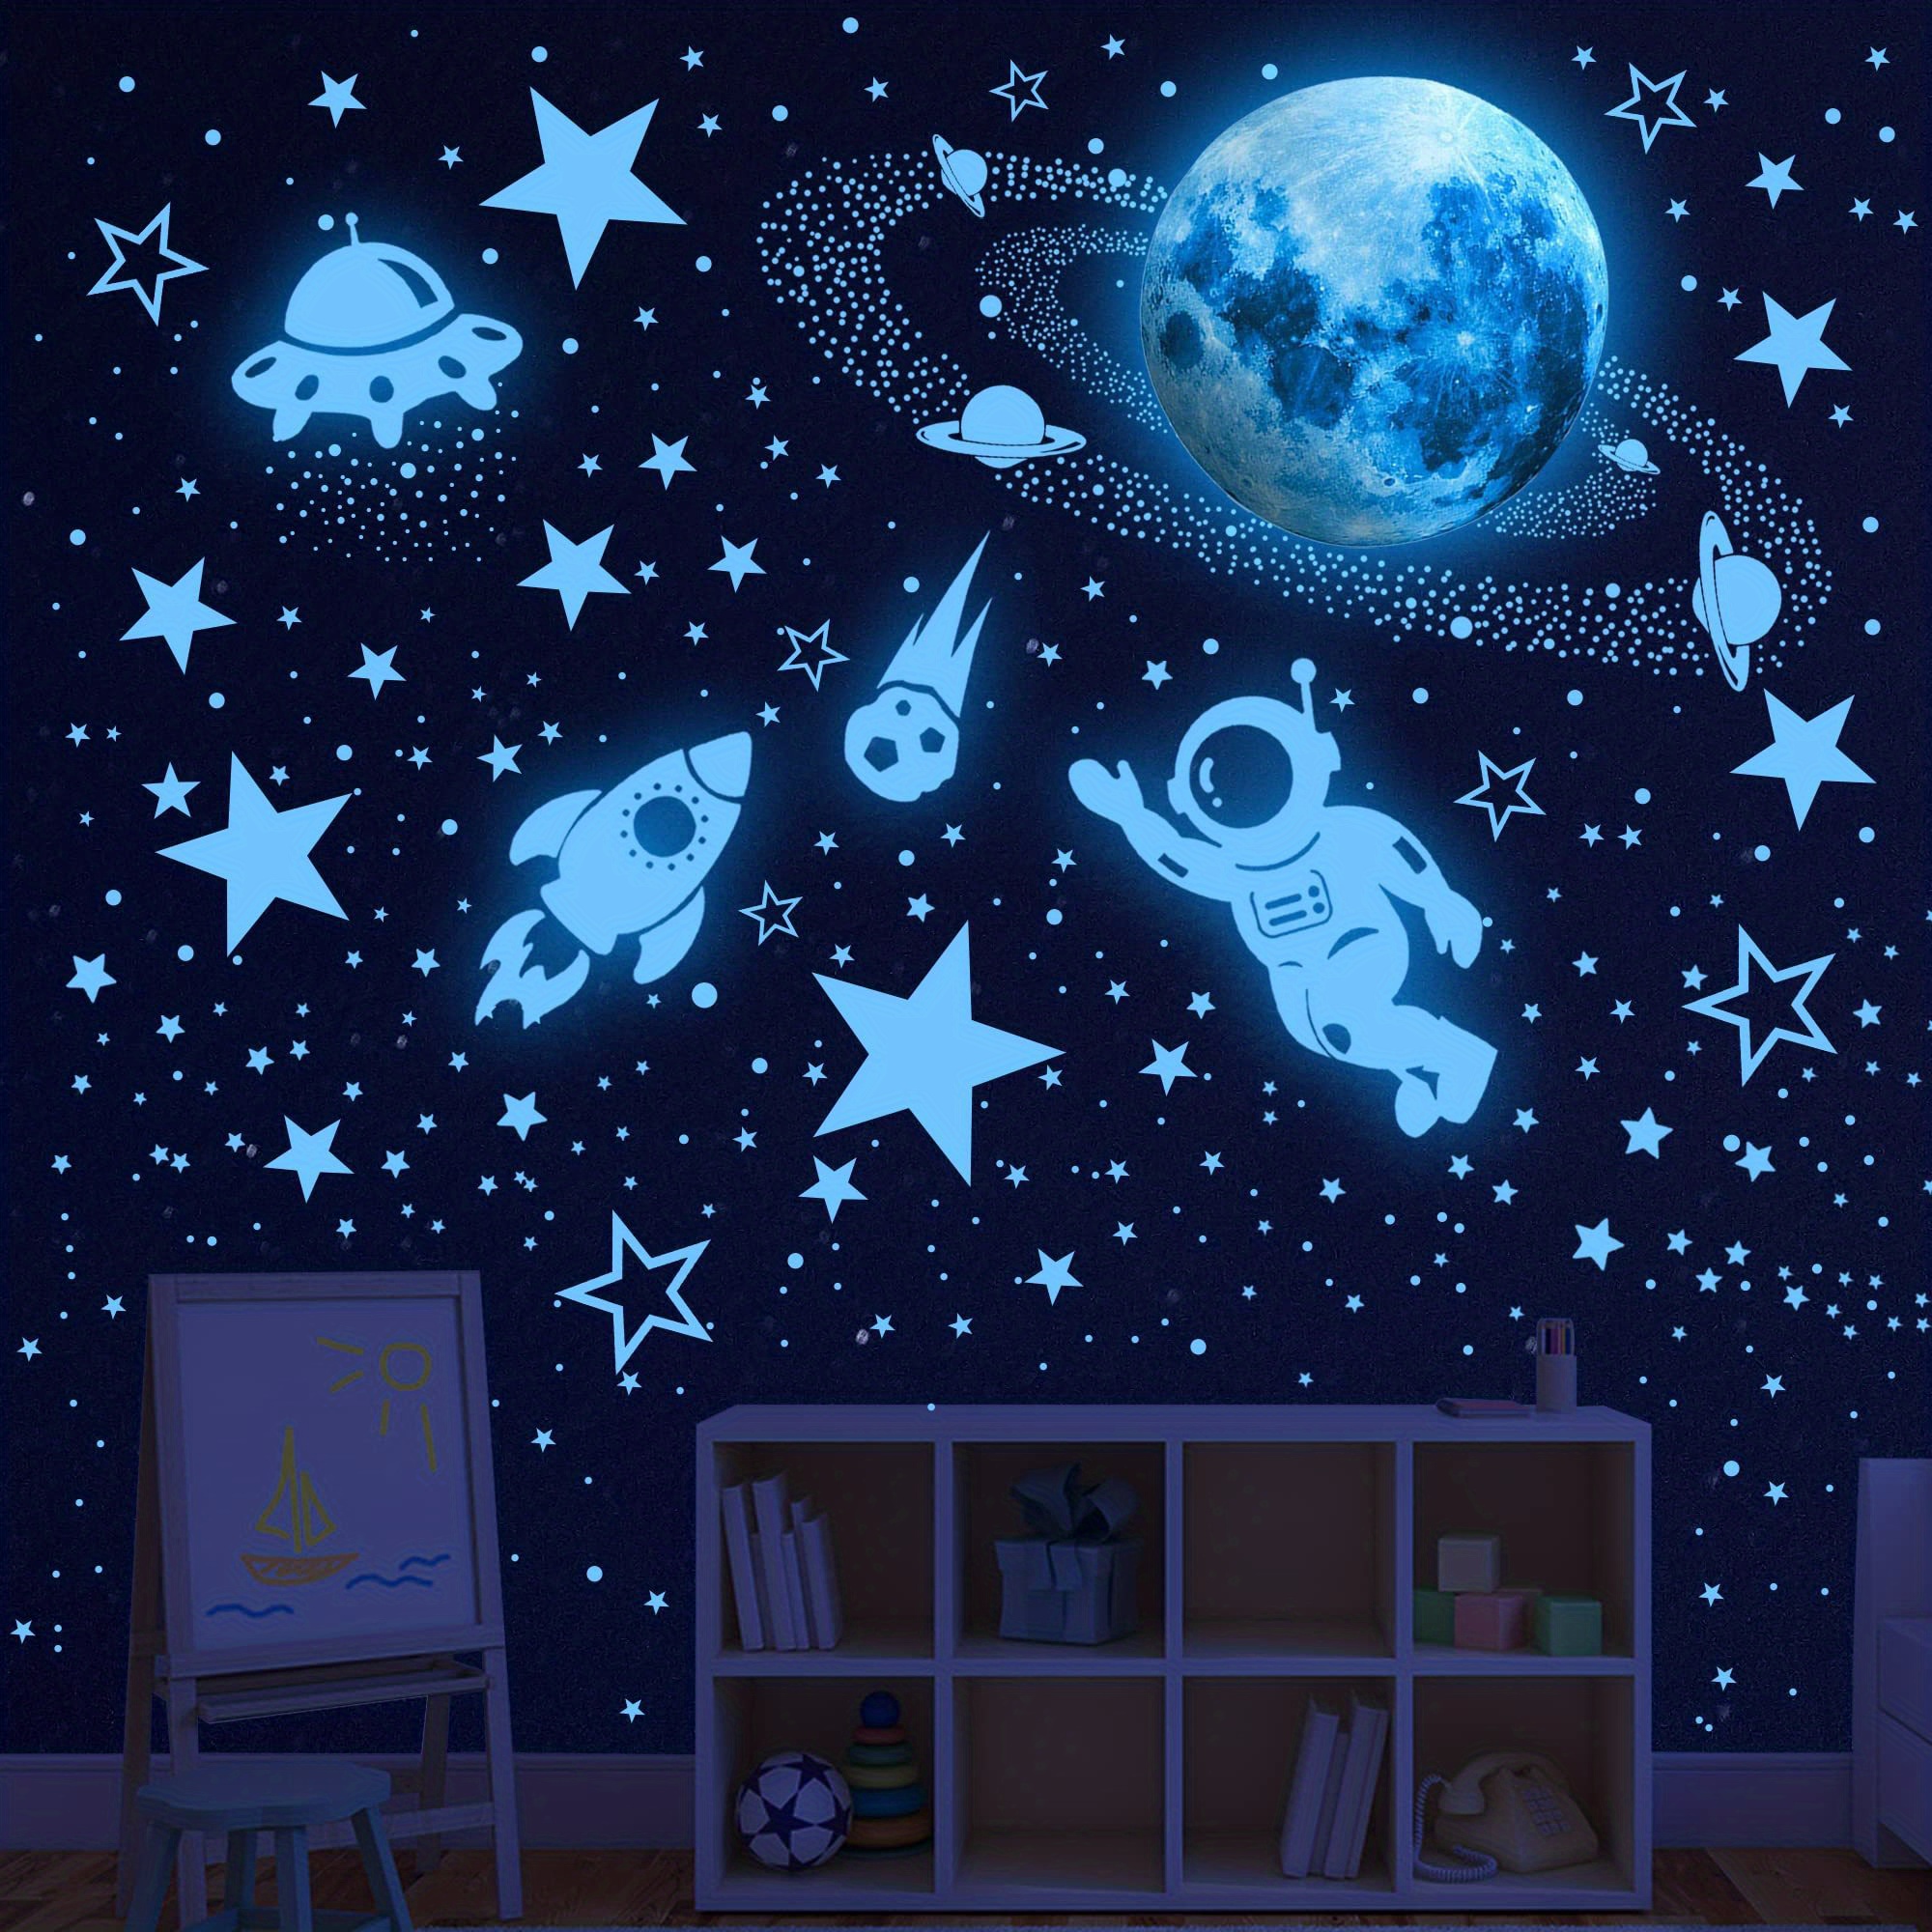 Children room wall sticker decall decor - space ships, stars and astronauts  - . Gift Ideas